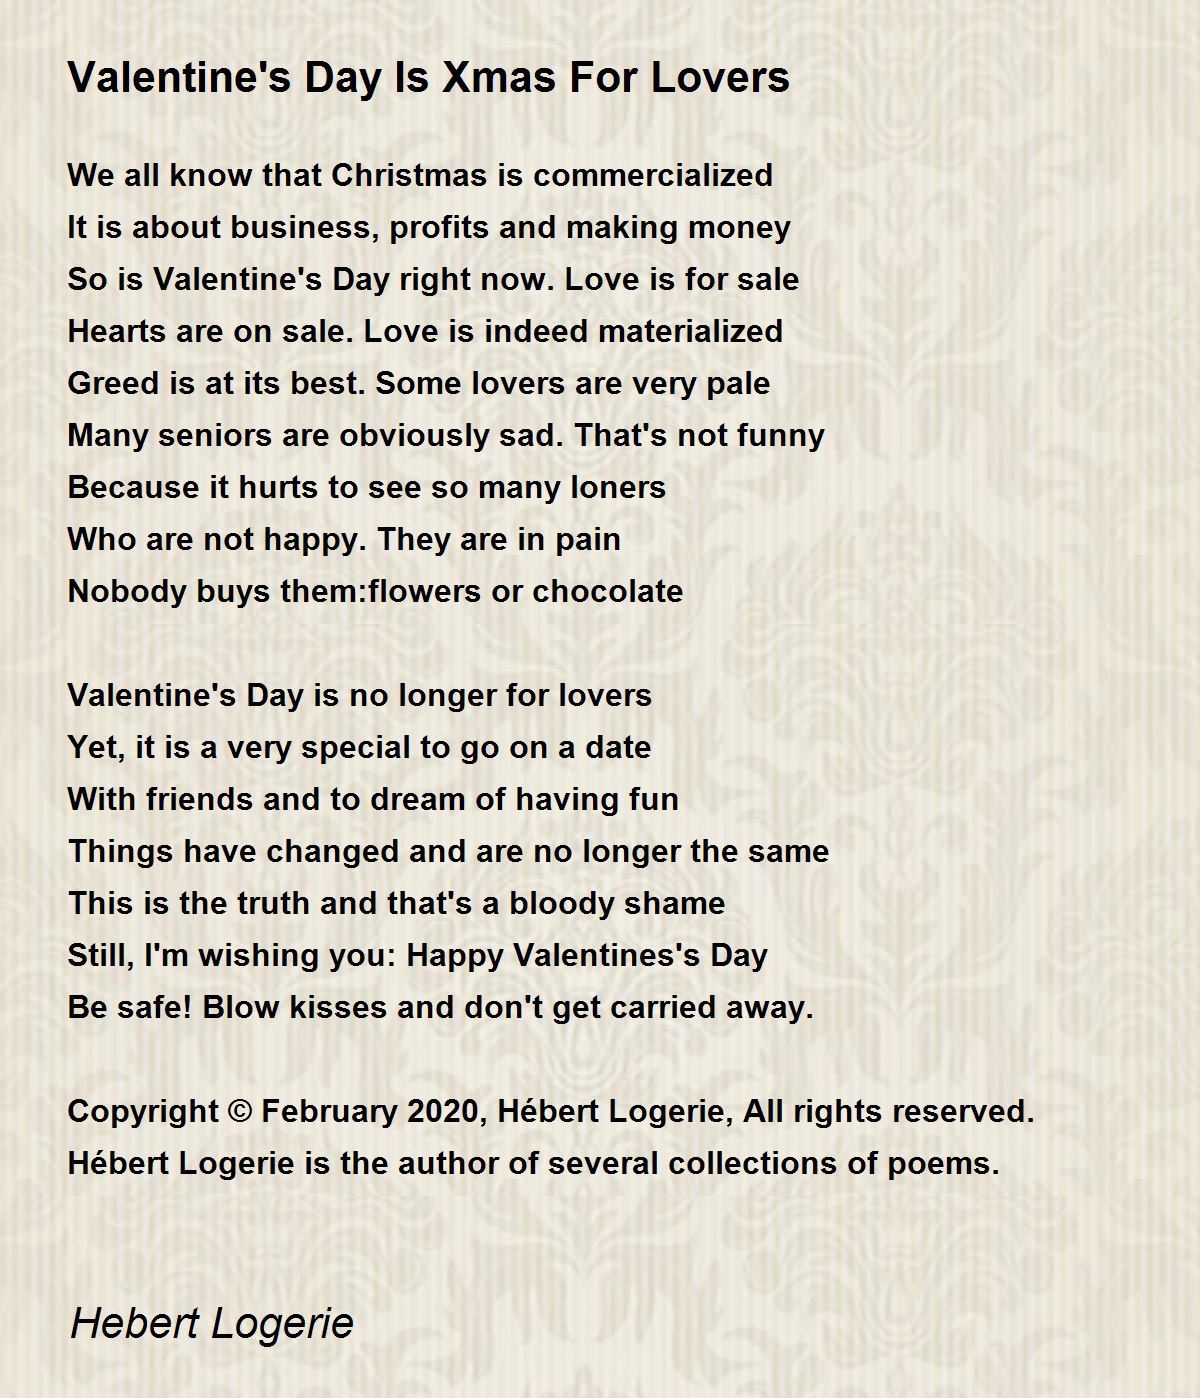 Valentine's Day Is Xmas For Lovers - Valentine's Day Is Xmas For Lovers Poem  by Hebert Logerie